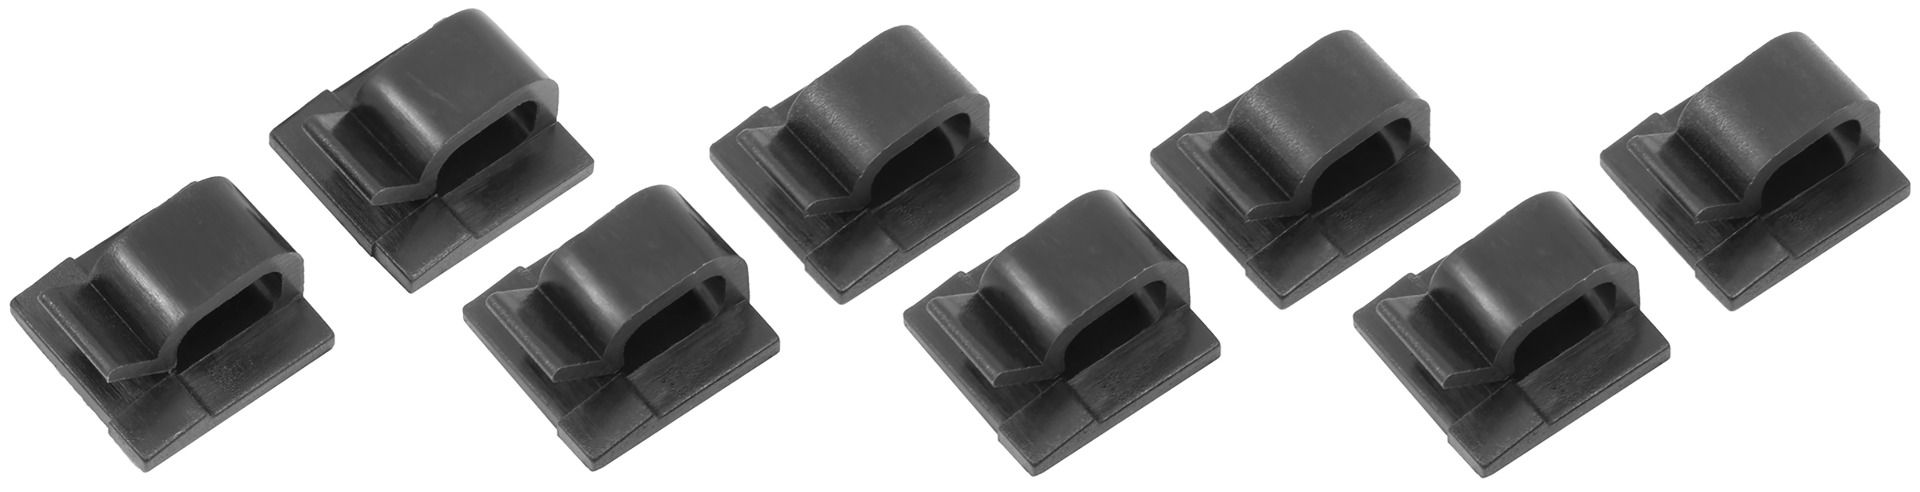 Brodit adhesive cable clips (4-pack) max.3.5mm thickness